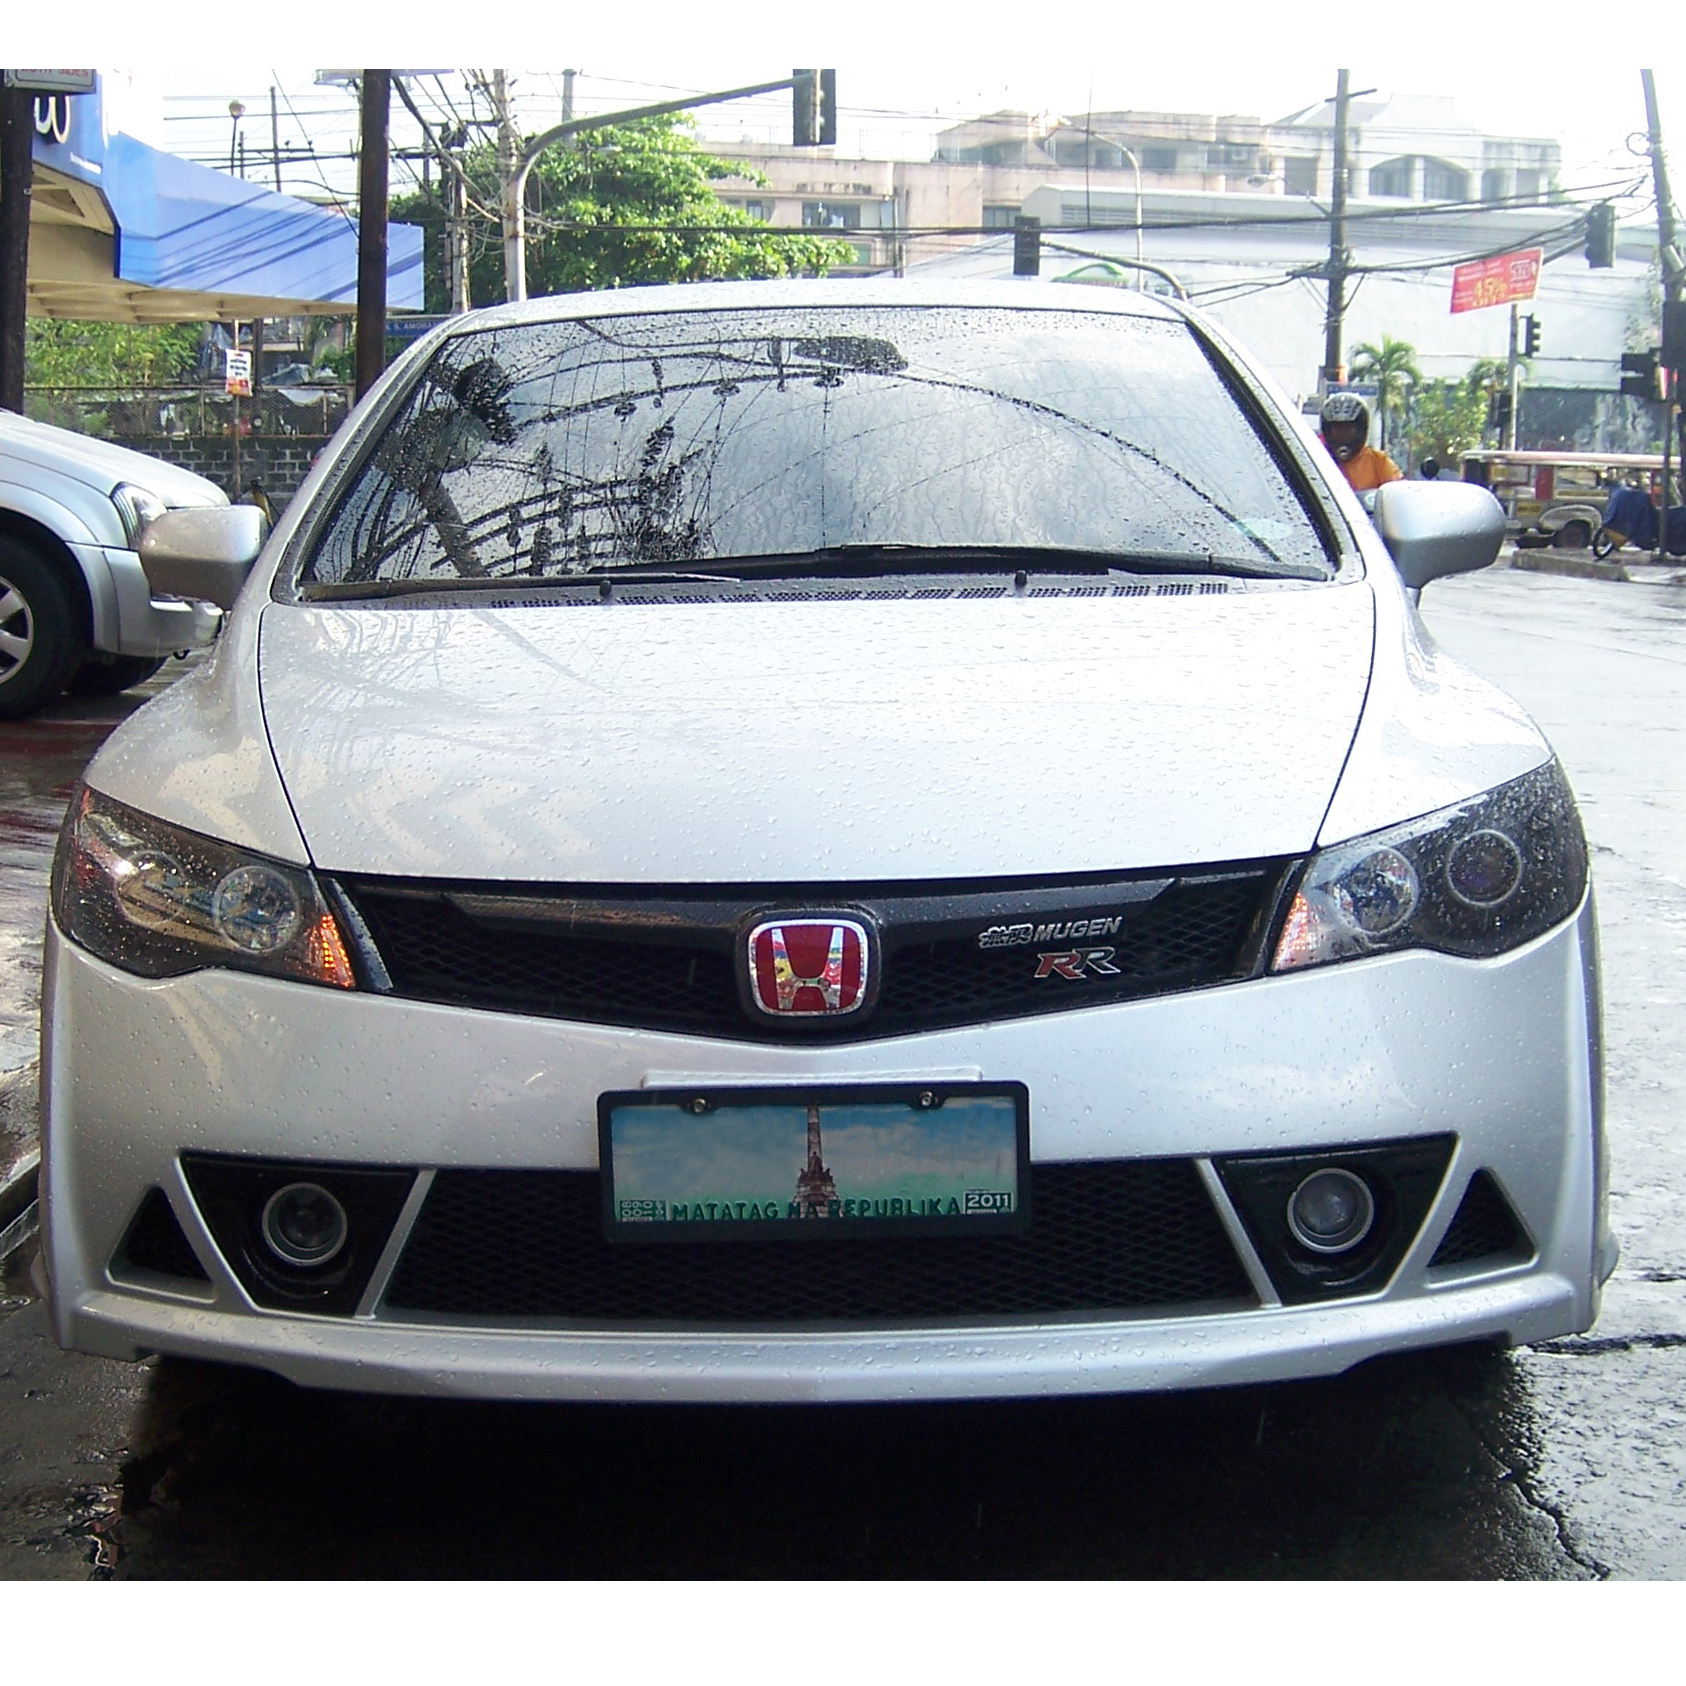 Civic 06 11 Body Kit Mugen Rr Twincell